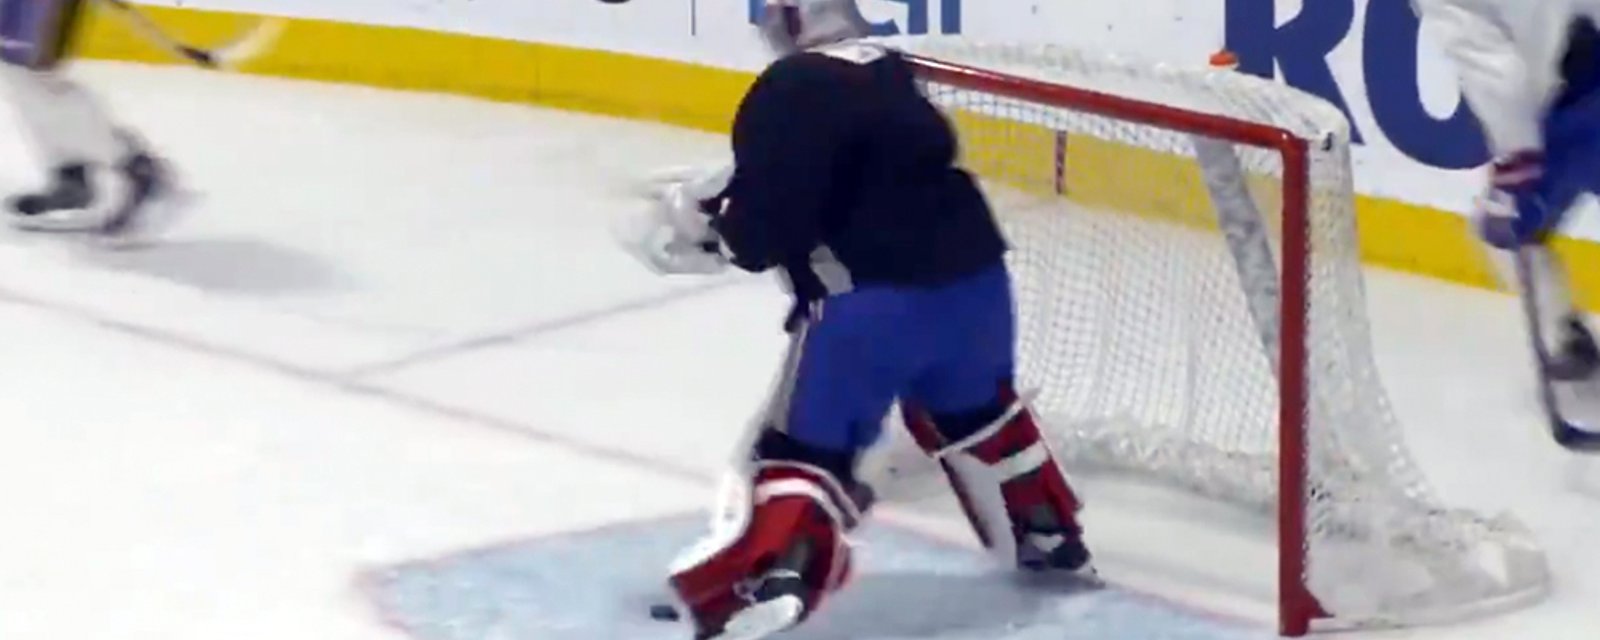 Carey Price smashes his stick and blows up at Habs practice